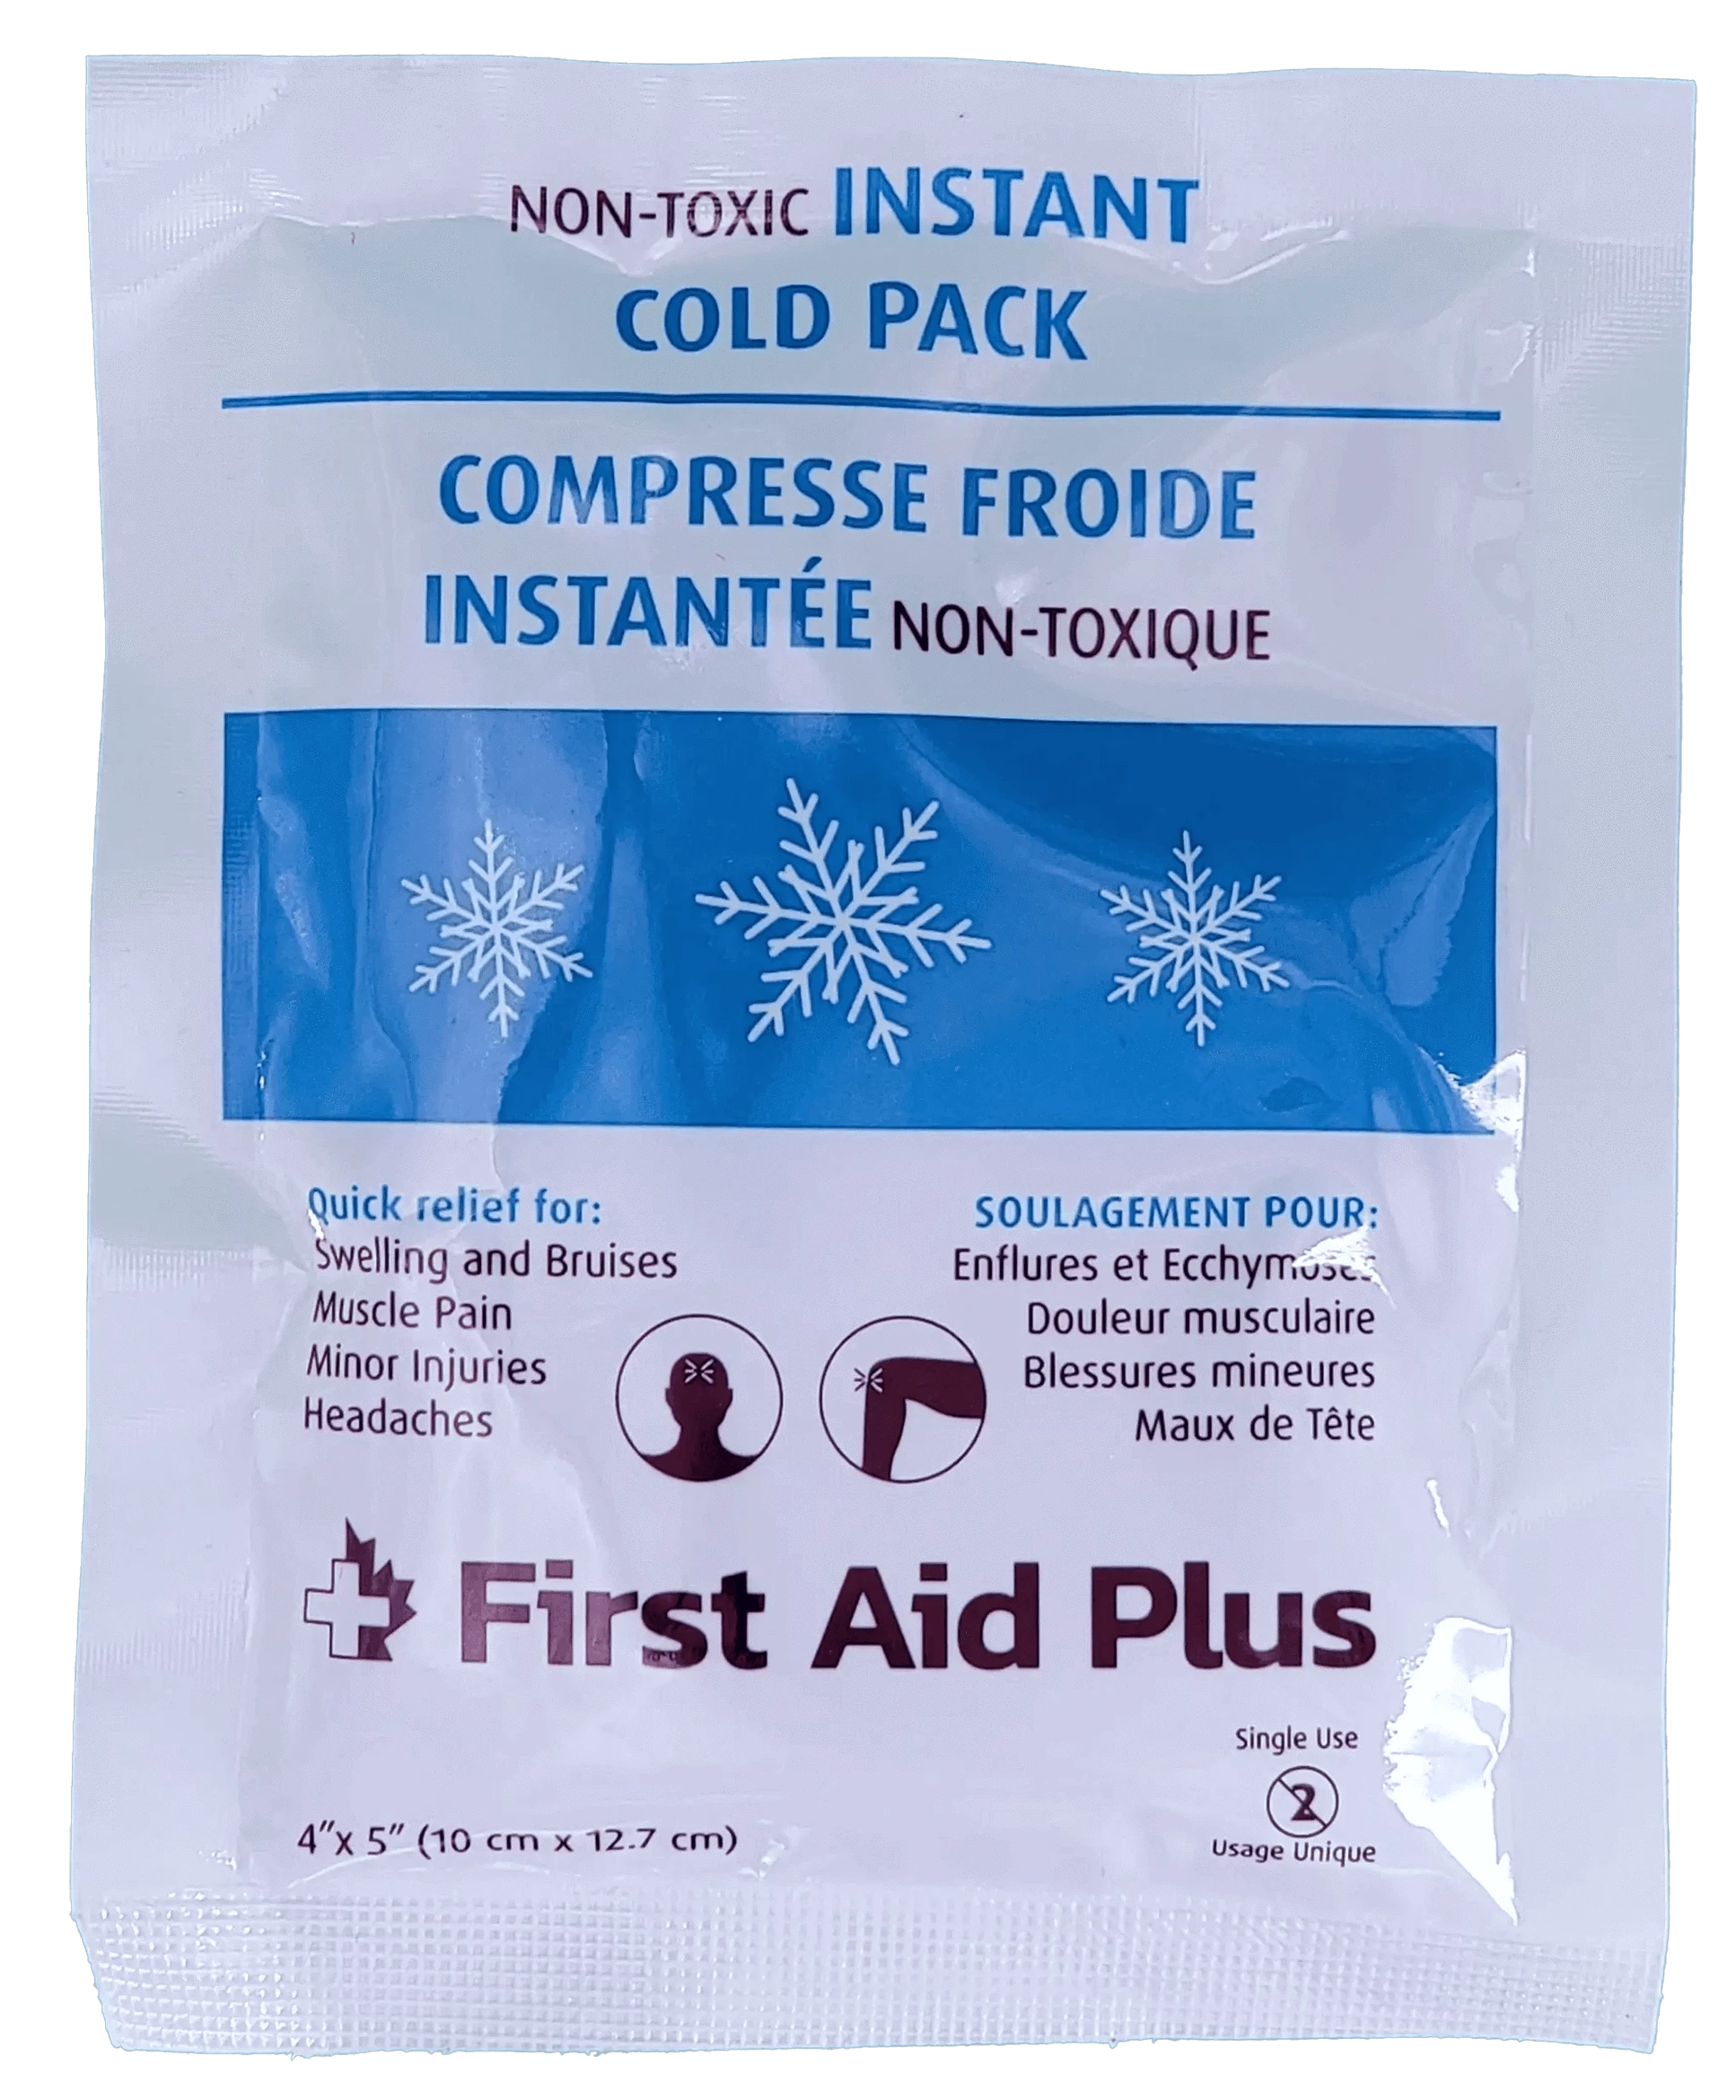 Easy Ice (Large) Disposable Instant Ice Pack - Ice & Heat Packs